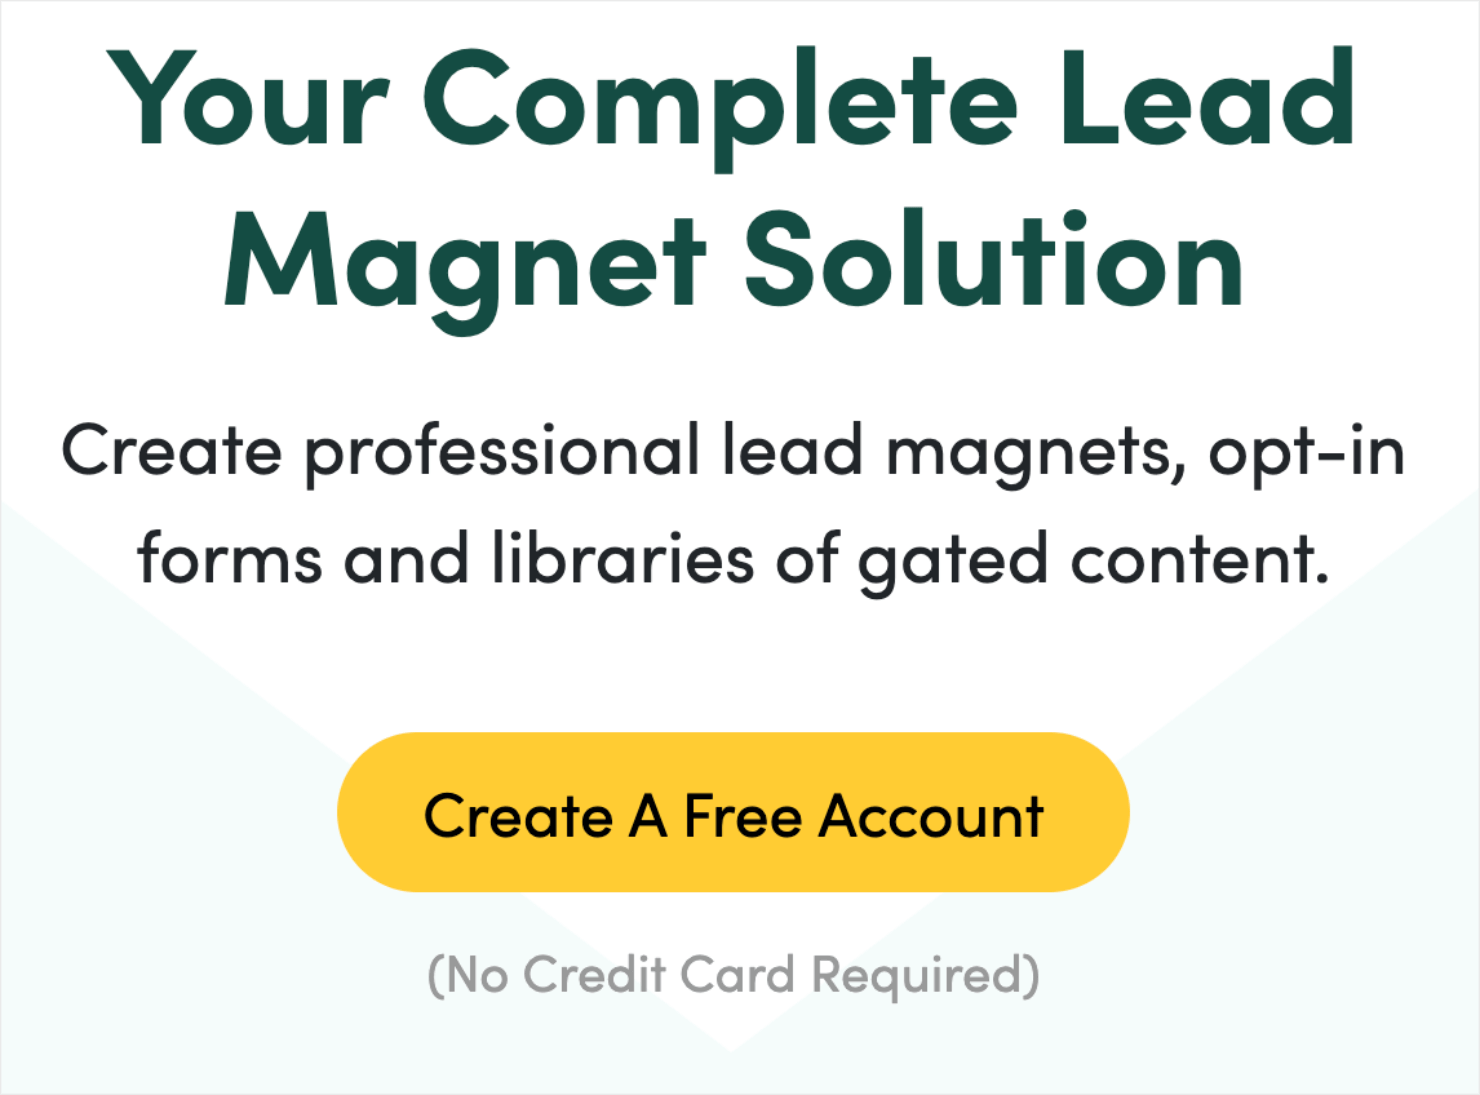 how to generate leads with lead magnets